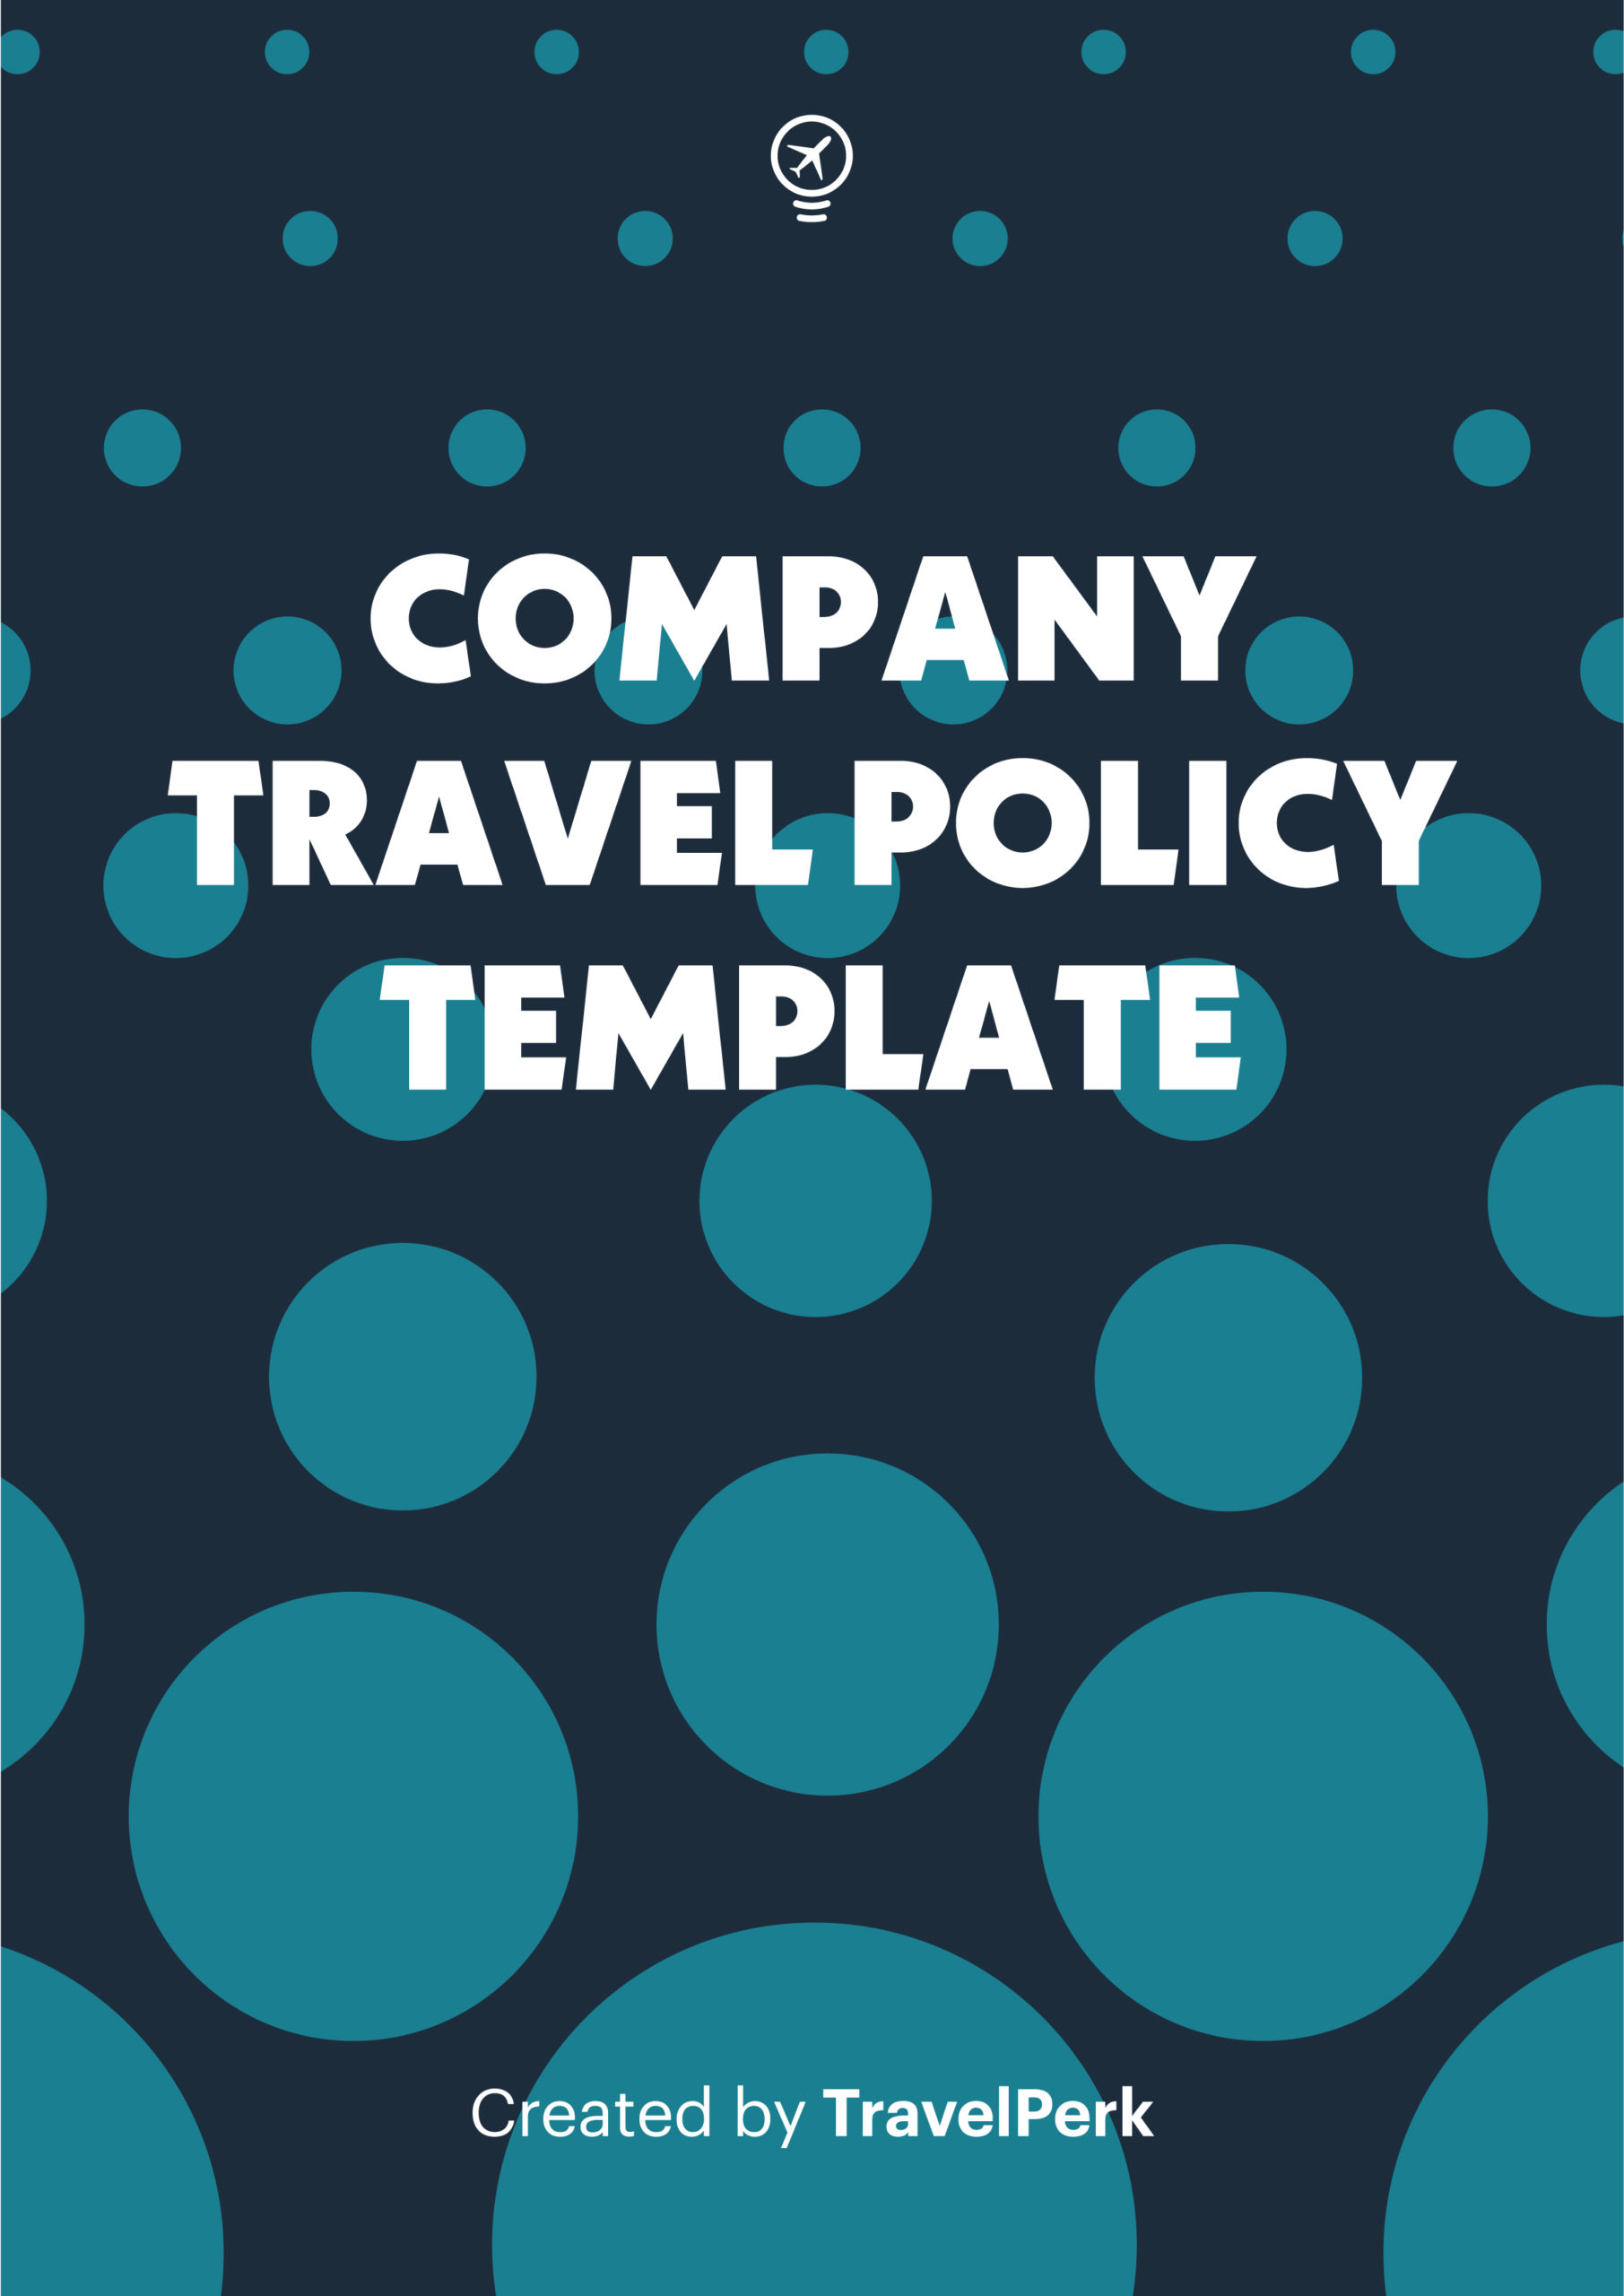 Company travel policy template